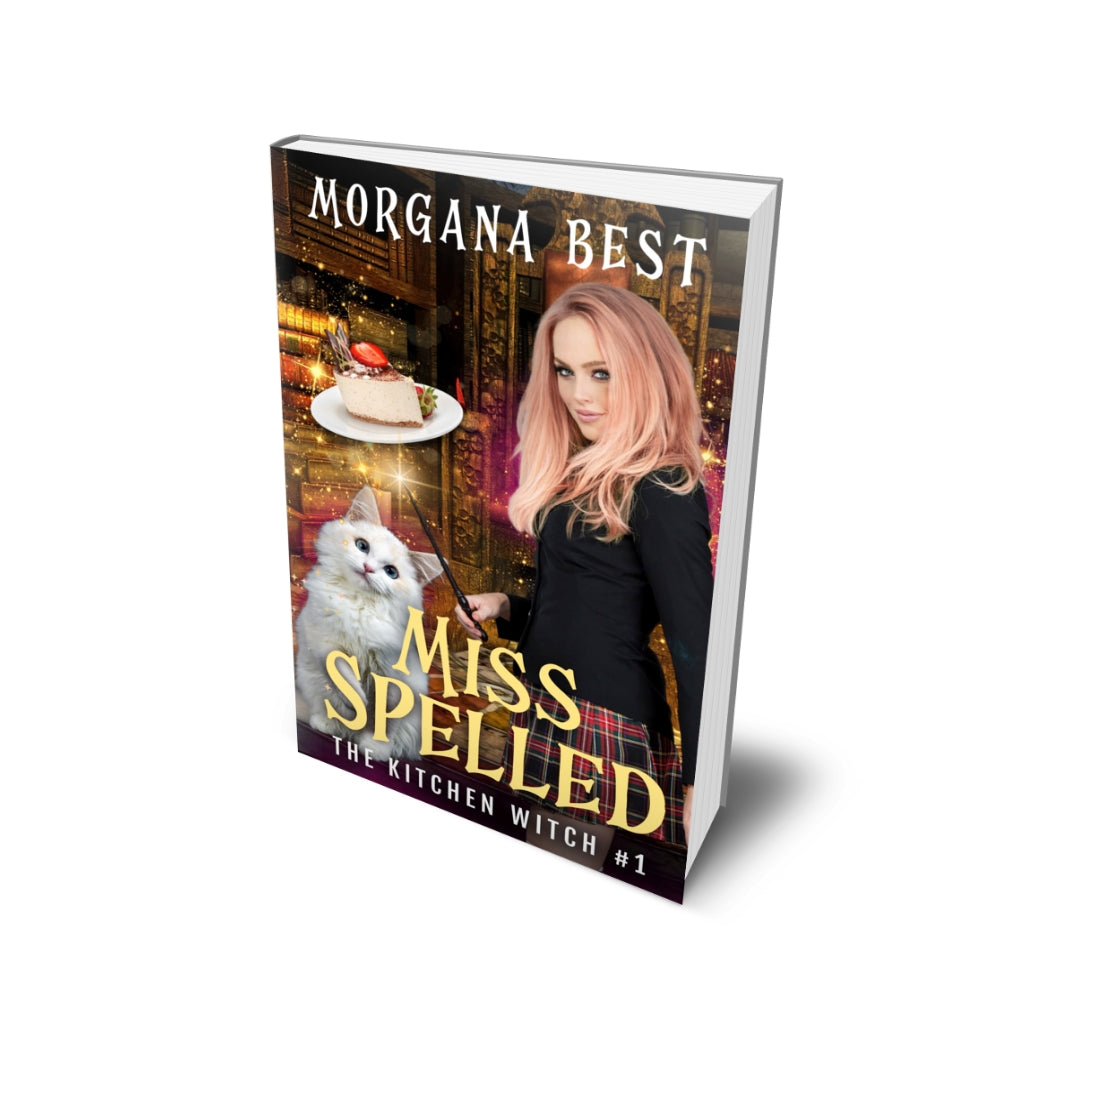 Miss Spelled The Kitchen Witch Volume 1 by Best Morgana